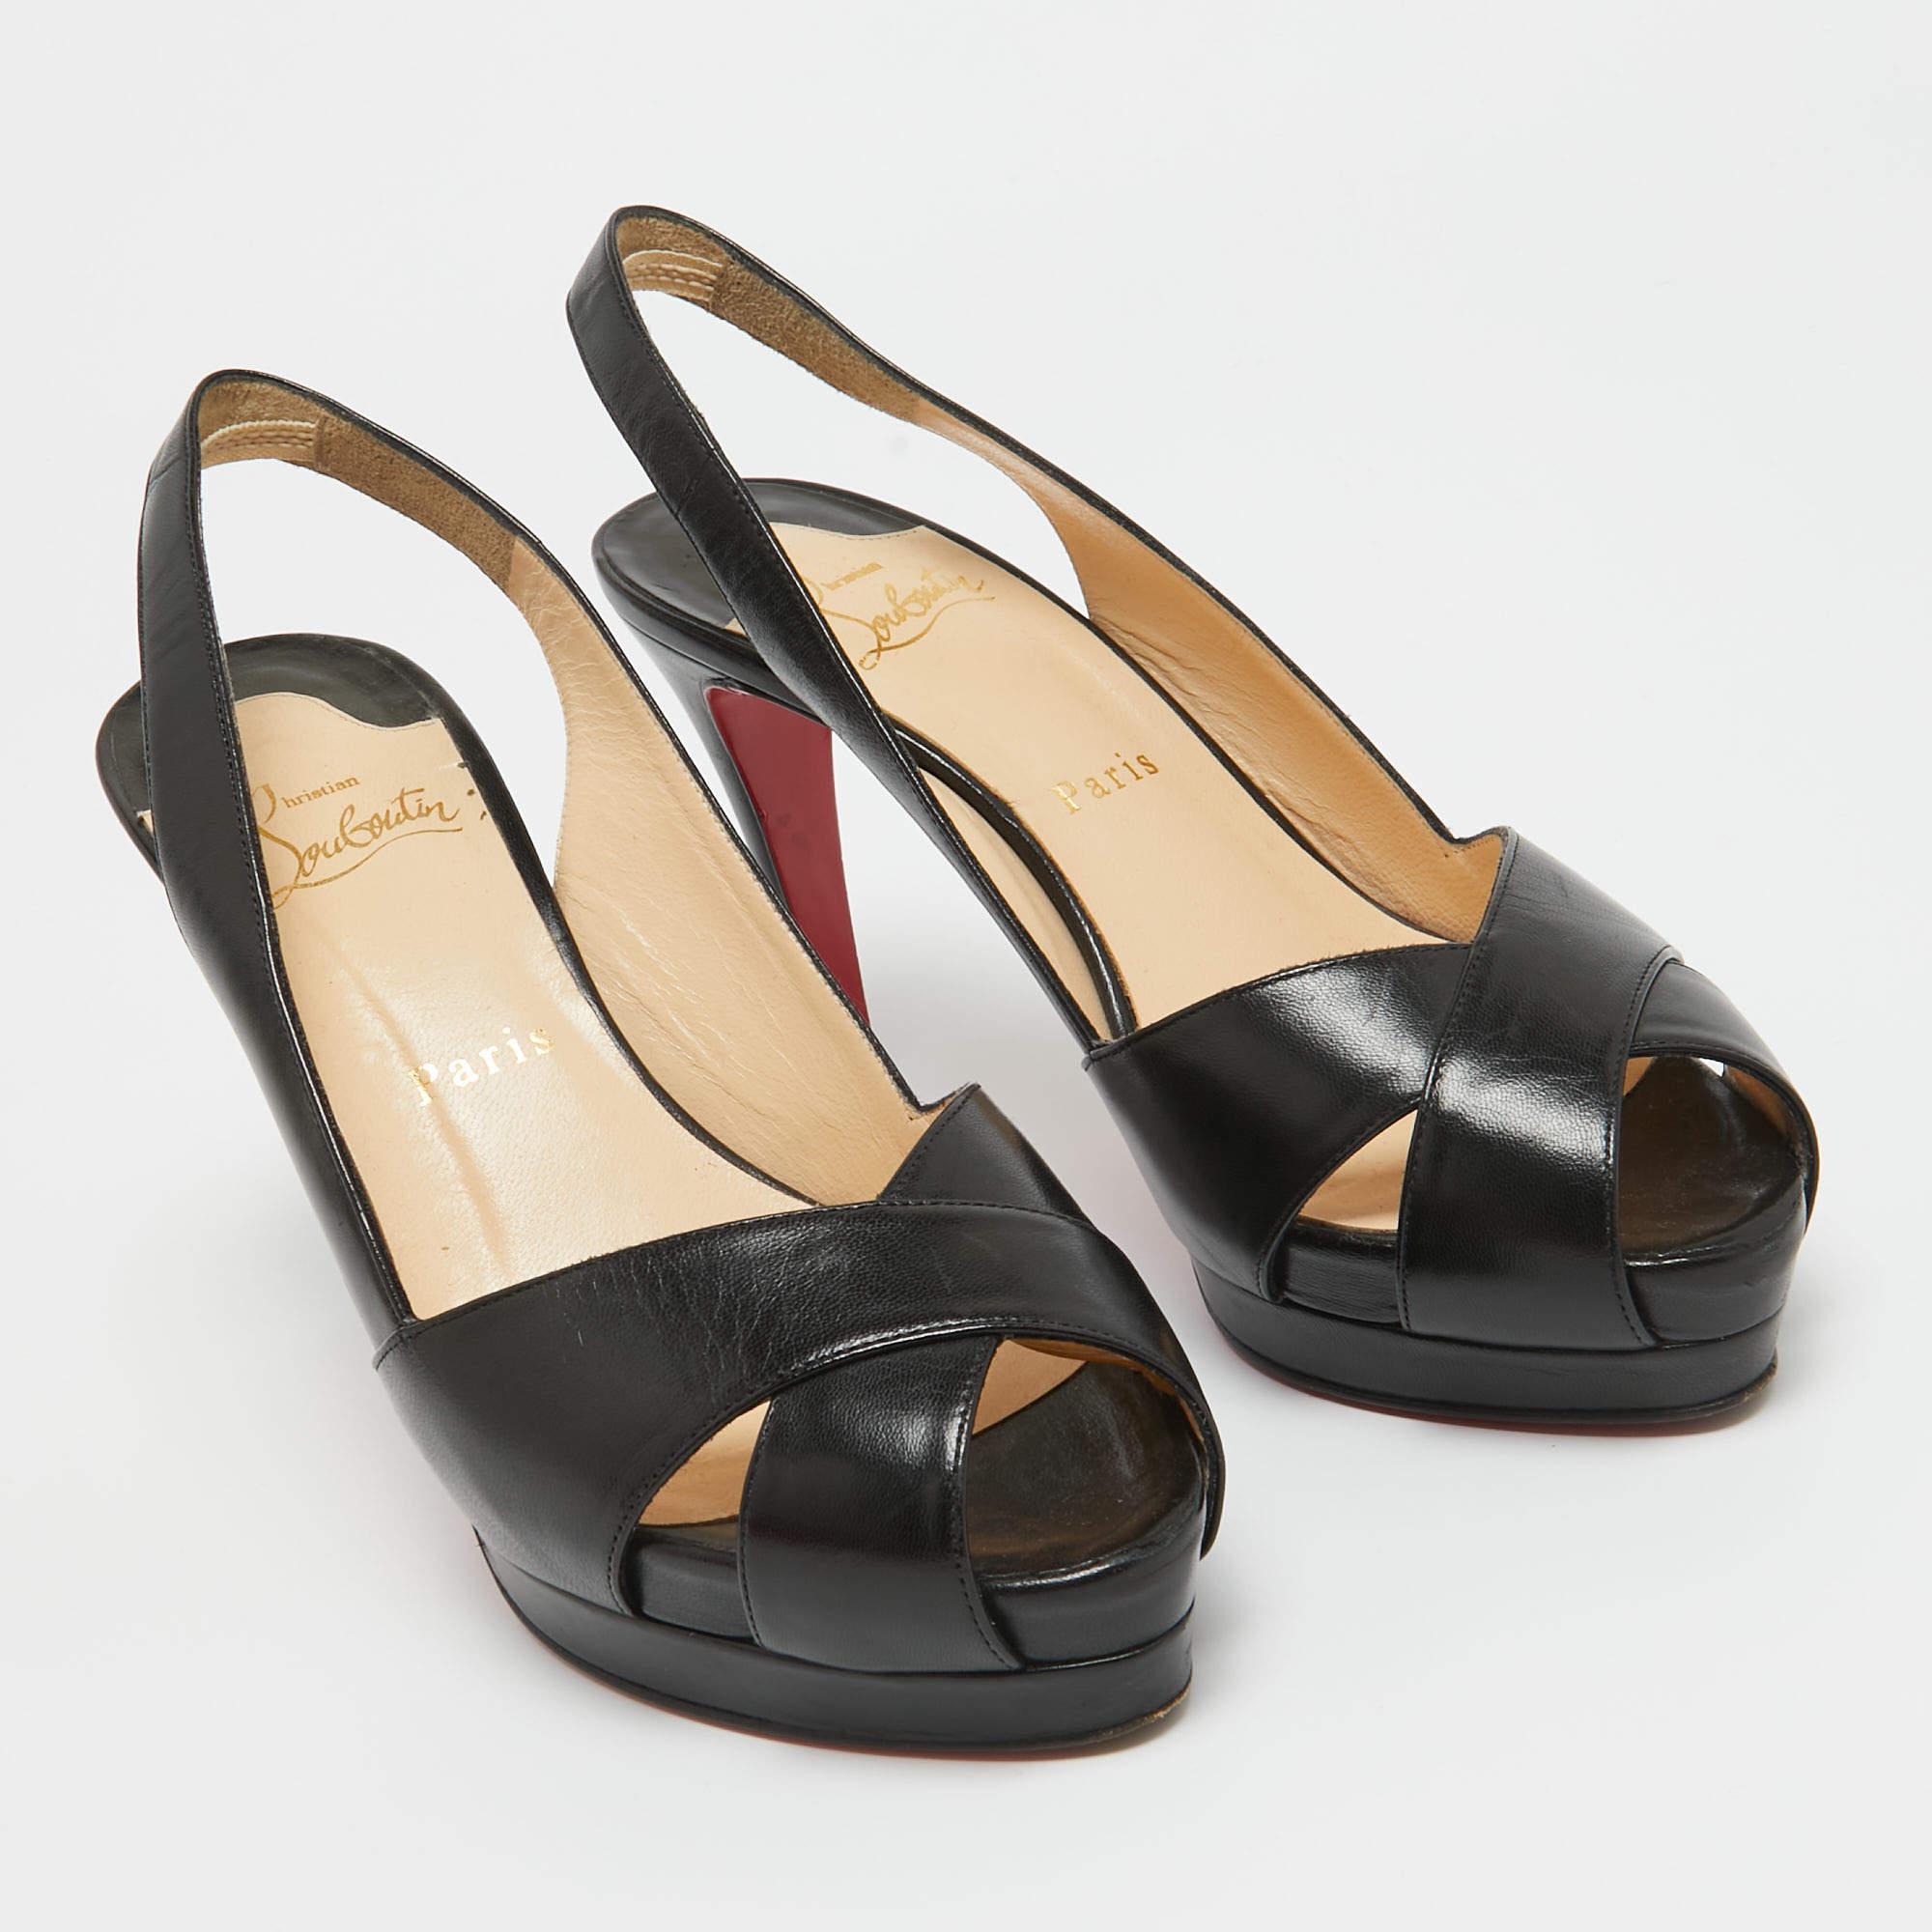 Christian Louboutin Black Leather Soso Slingback Pumps Size 38 For Sale 3